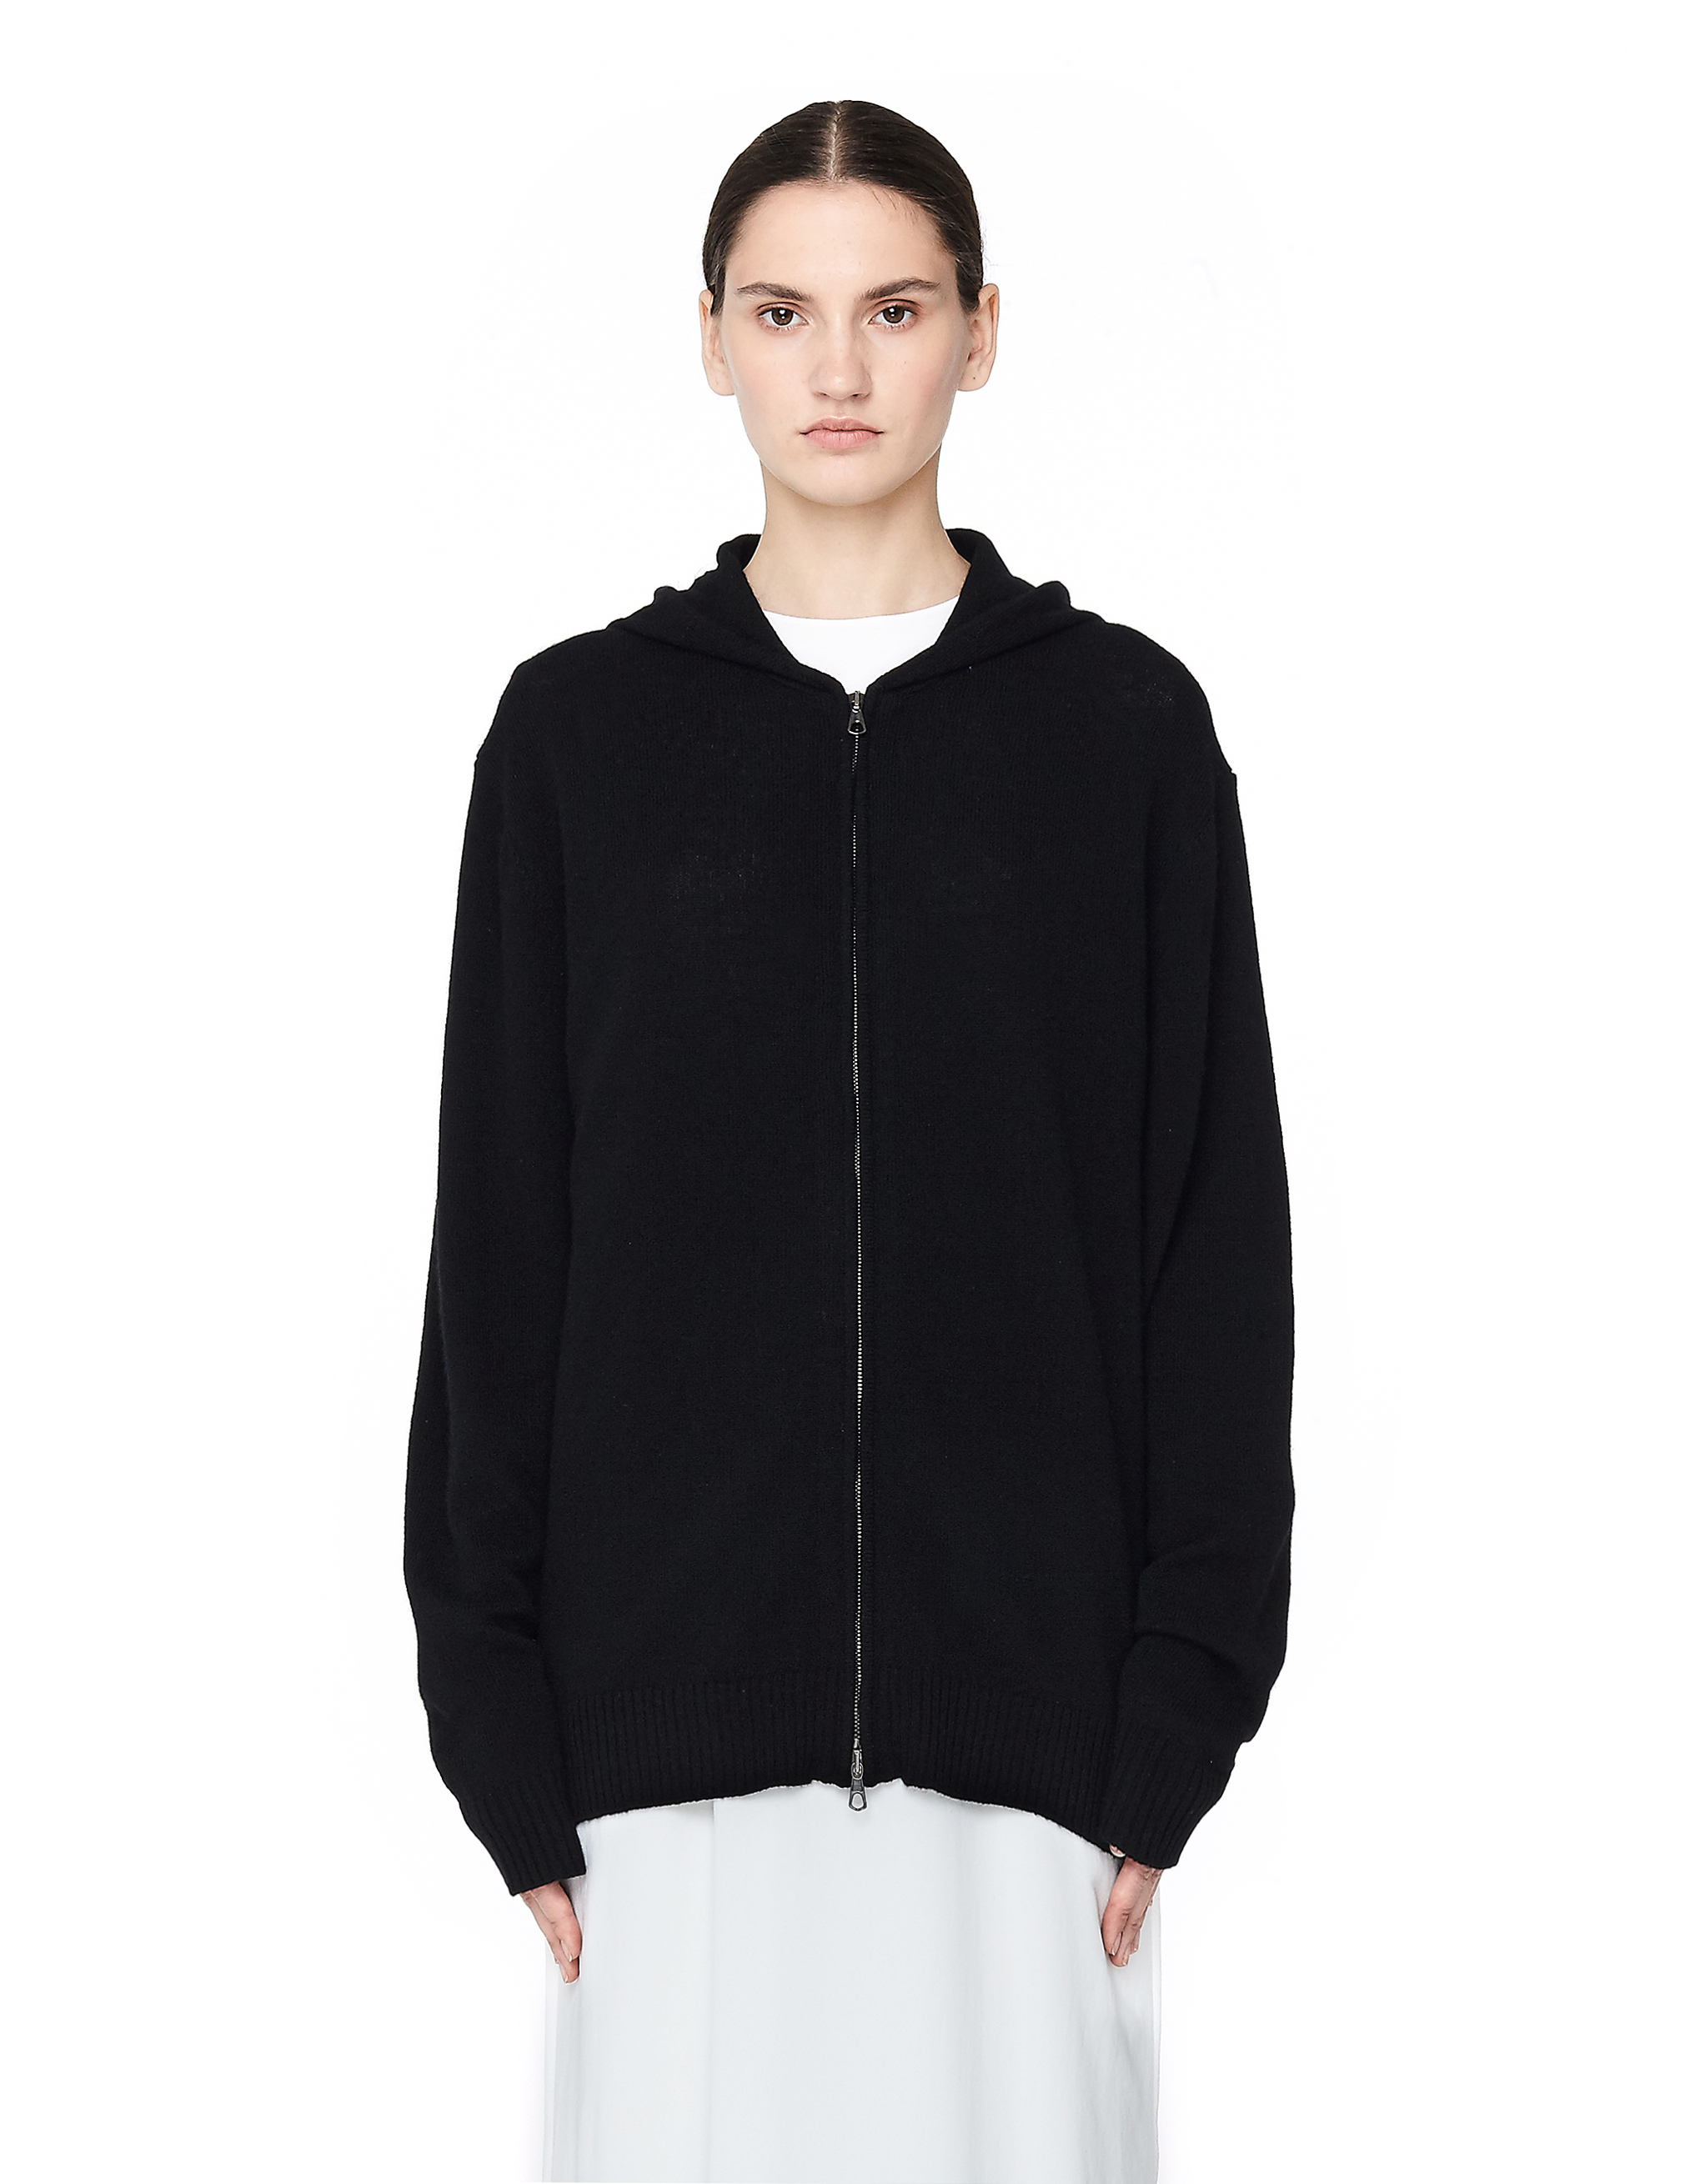 BLACKYOTO EMBROIDERED CASHMERE ZIP UP HOODIE,Genghis-EX